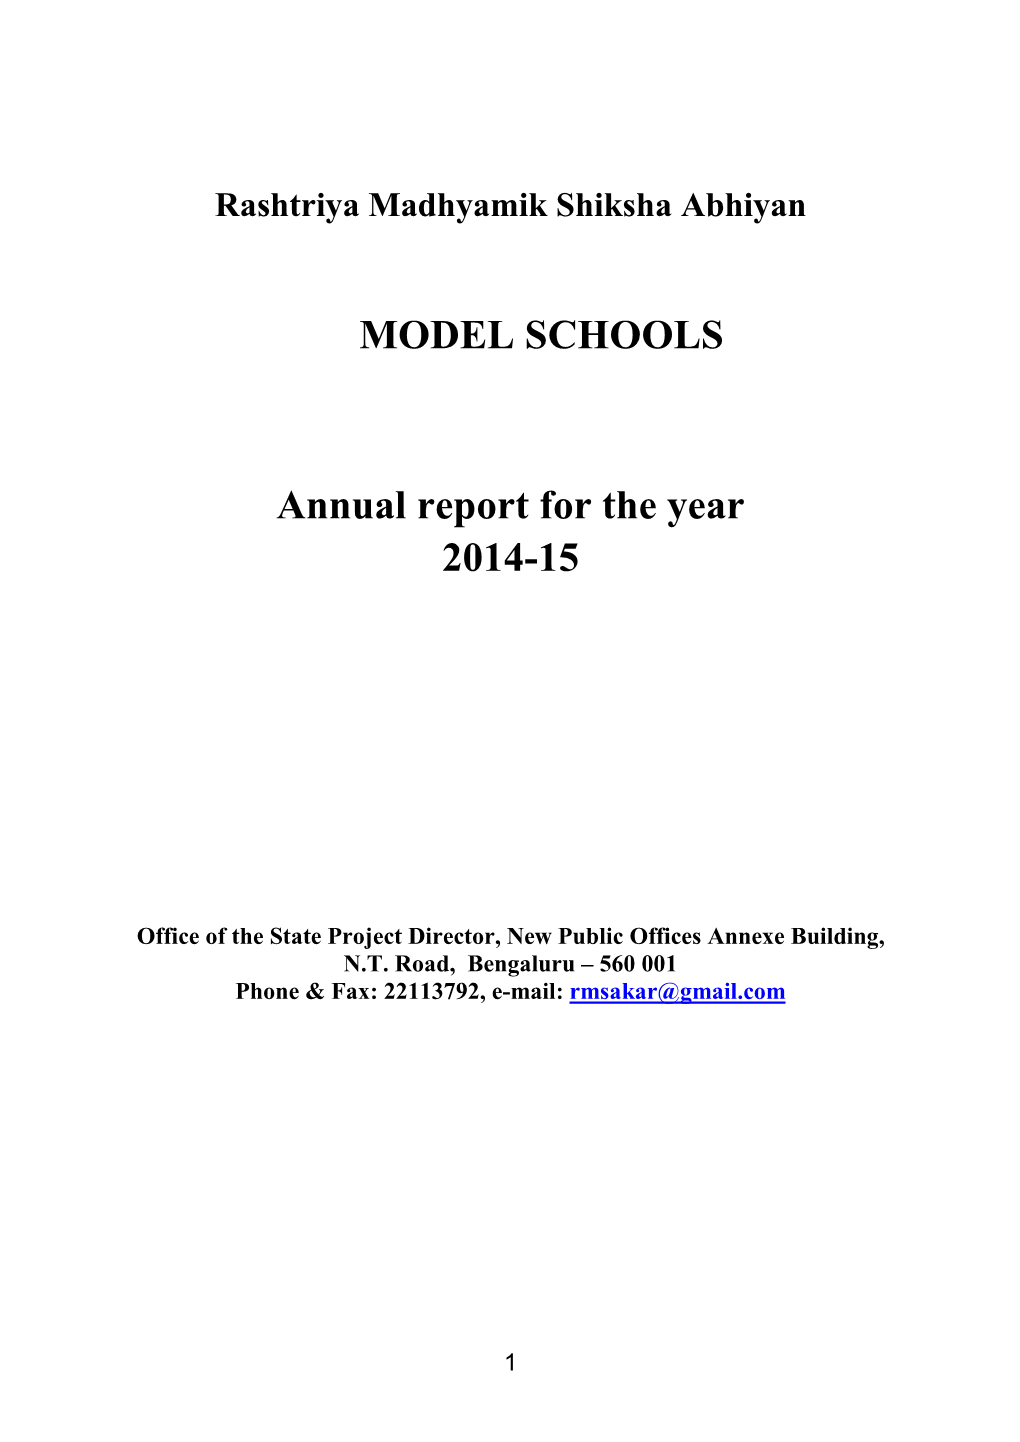 MODEL SCHOOLS Annual Report for the Year 2014-15